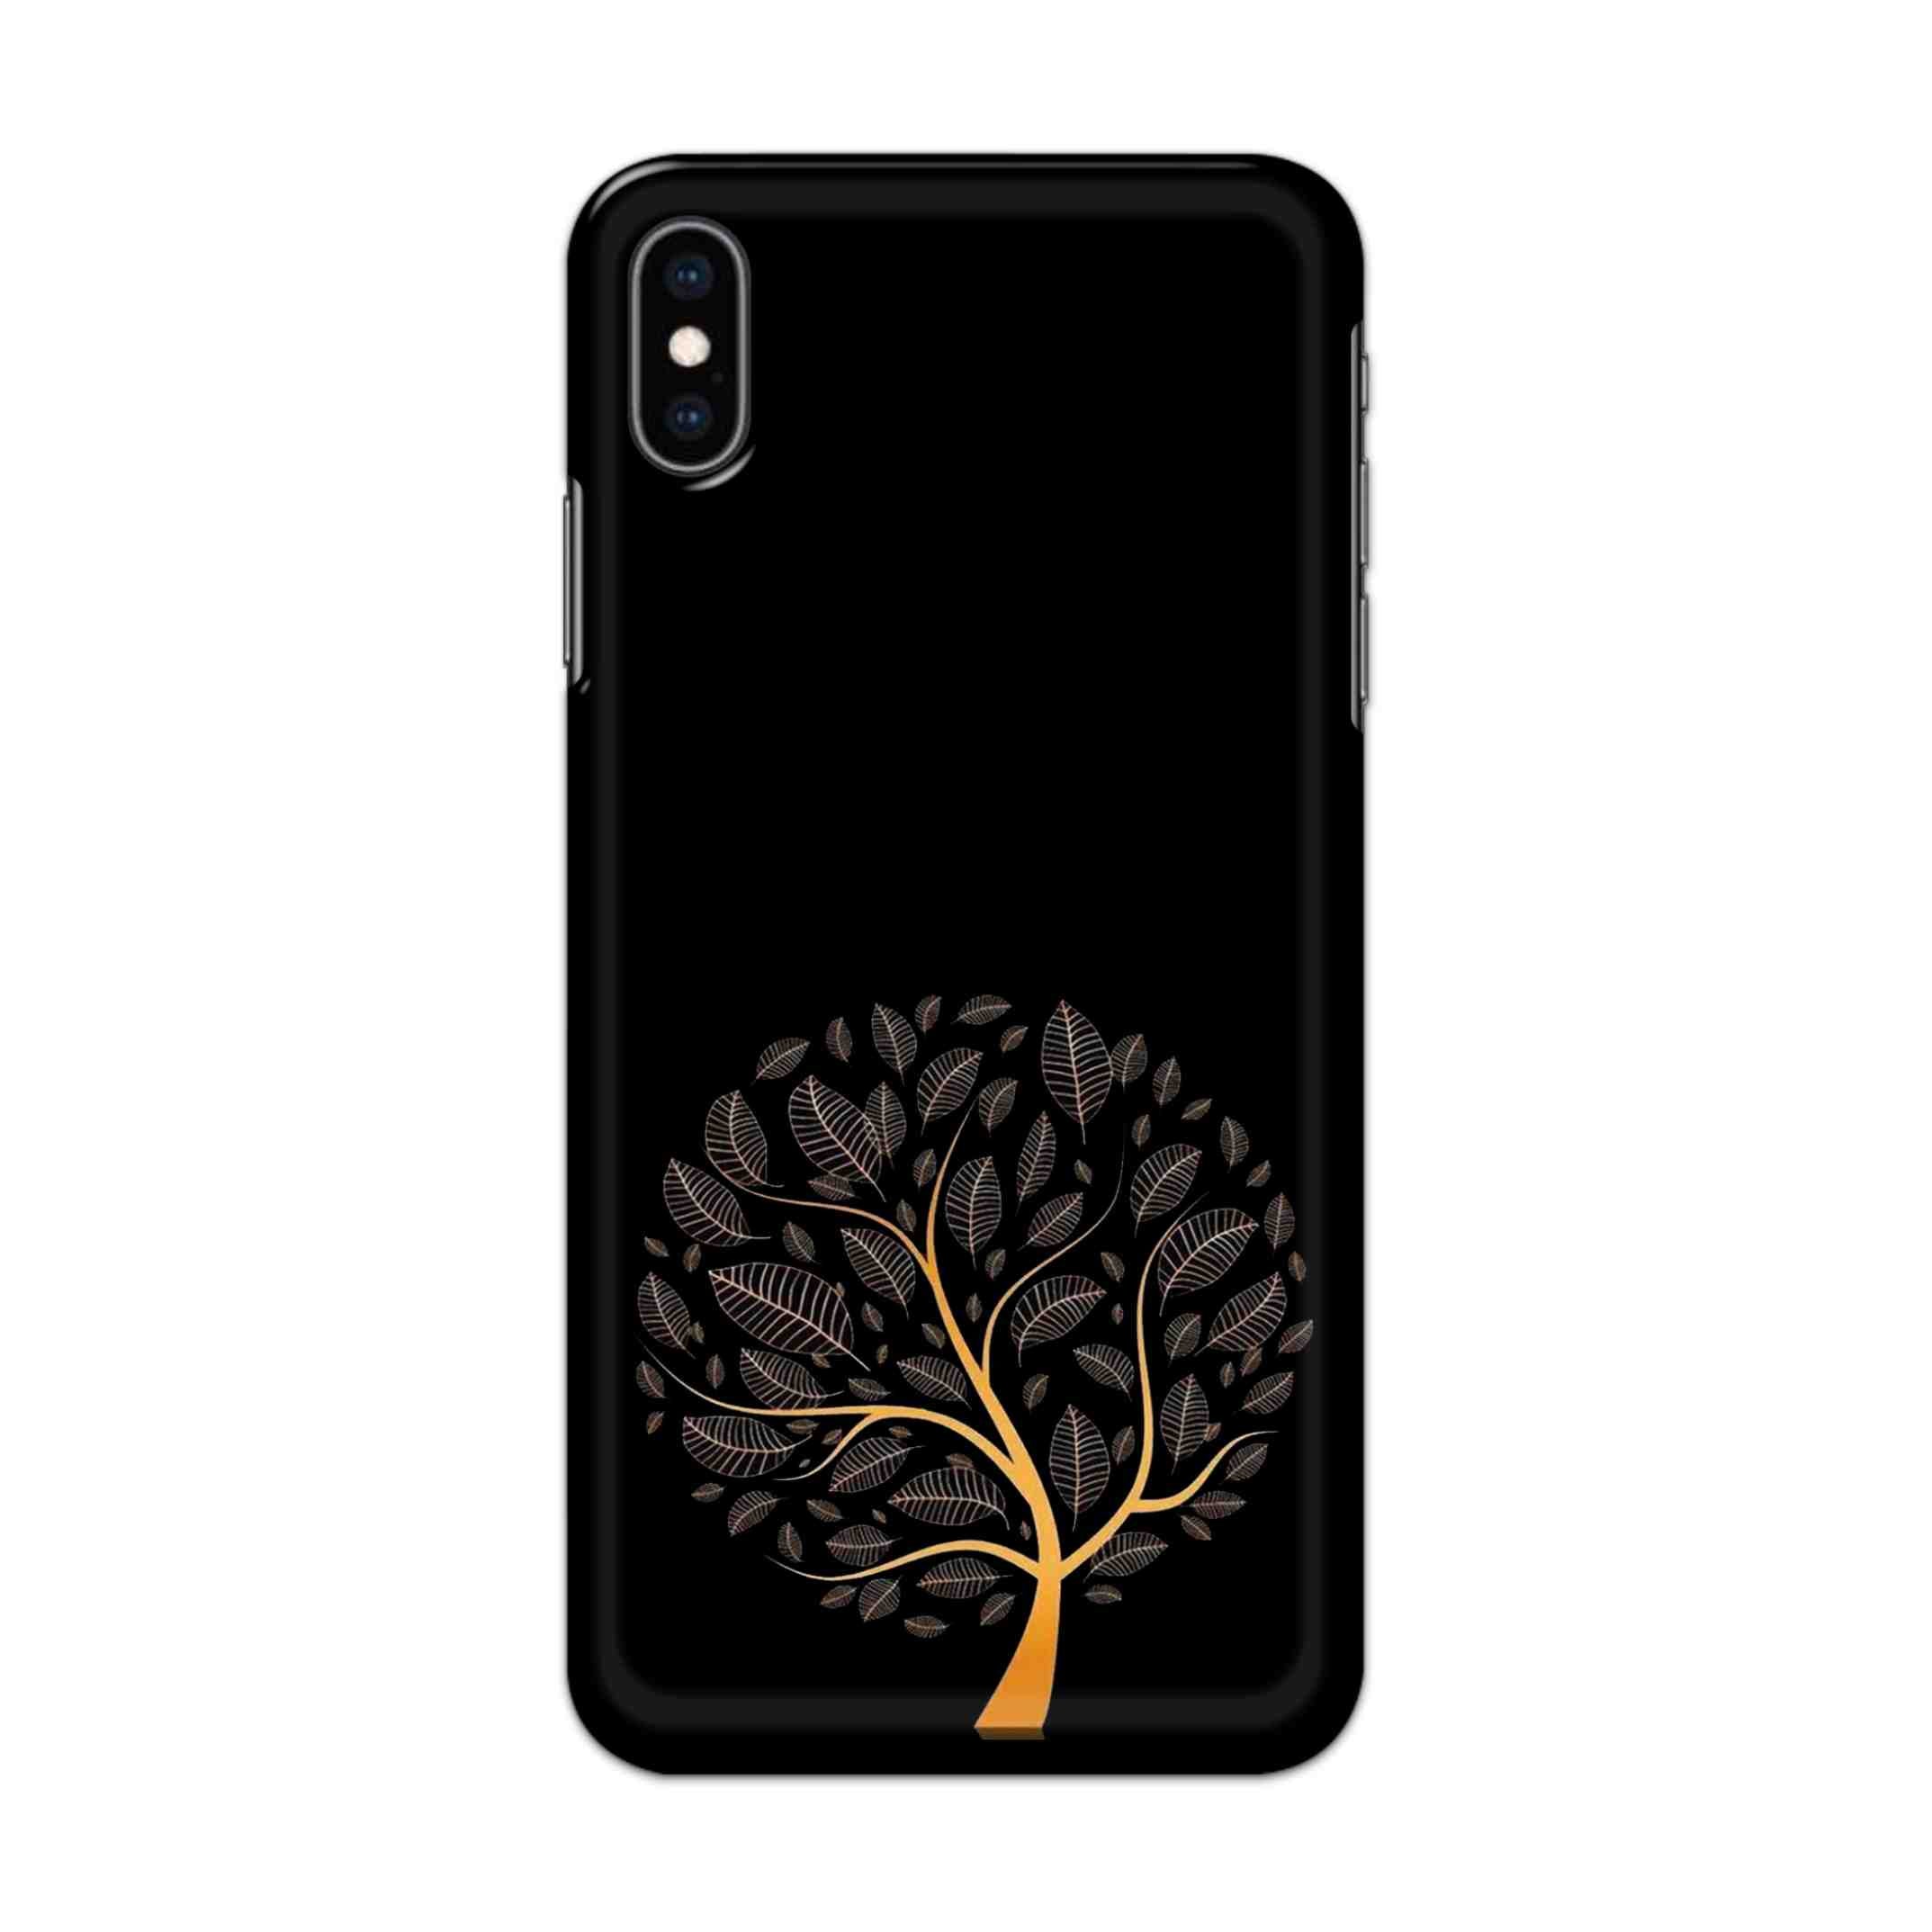 Buy Golden Tree Hard Back Mobile Phone Case/Cover For iPhone XS MAX Online